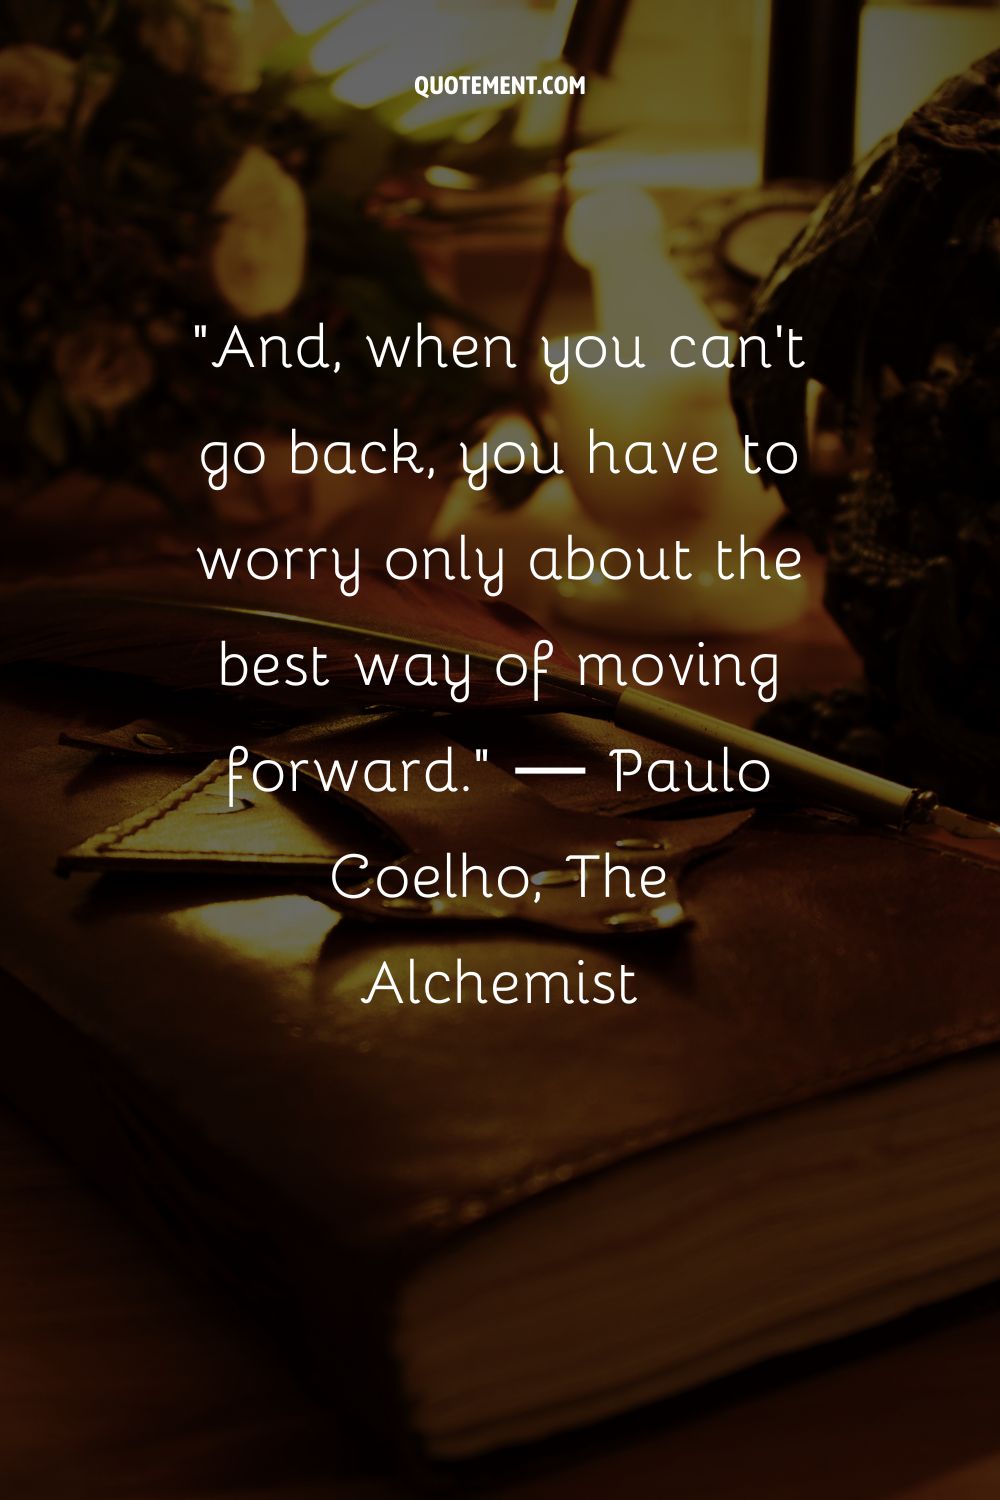 And, when you can't go back, you have to worry only about the best way of moving forward